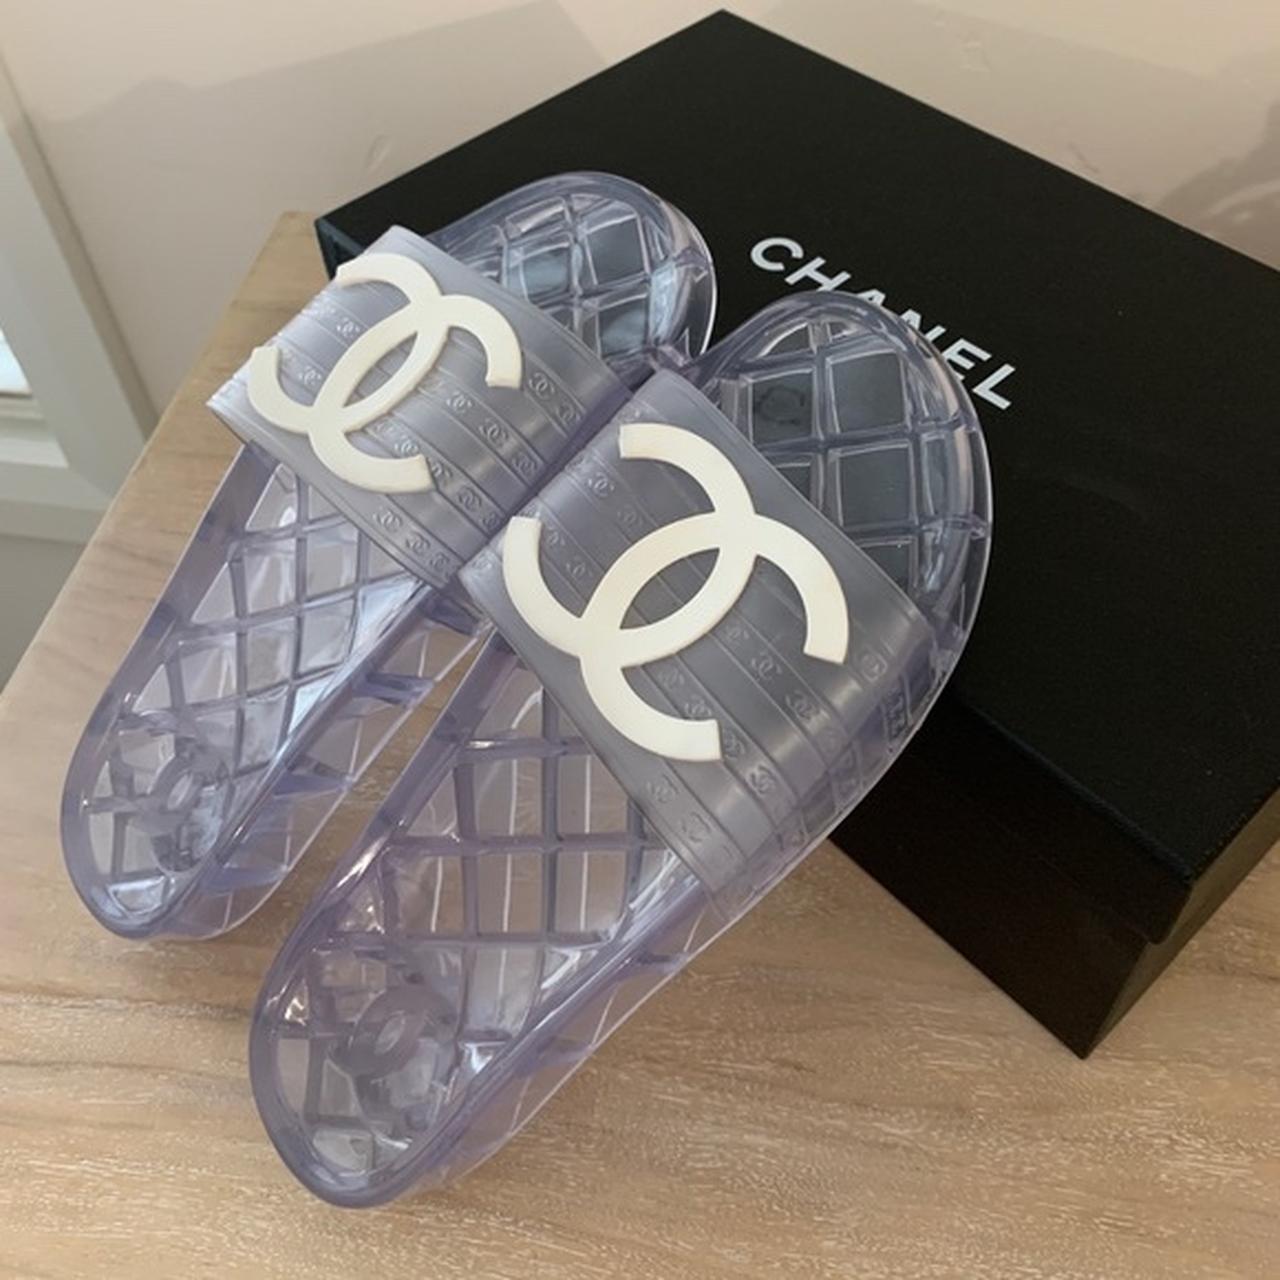 Chanel jelly slides size 38 non authentic. will